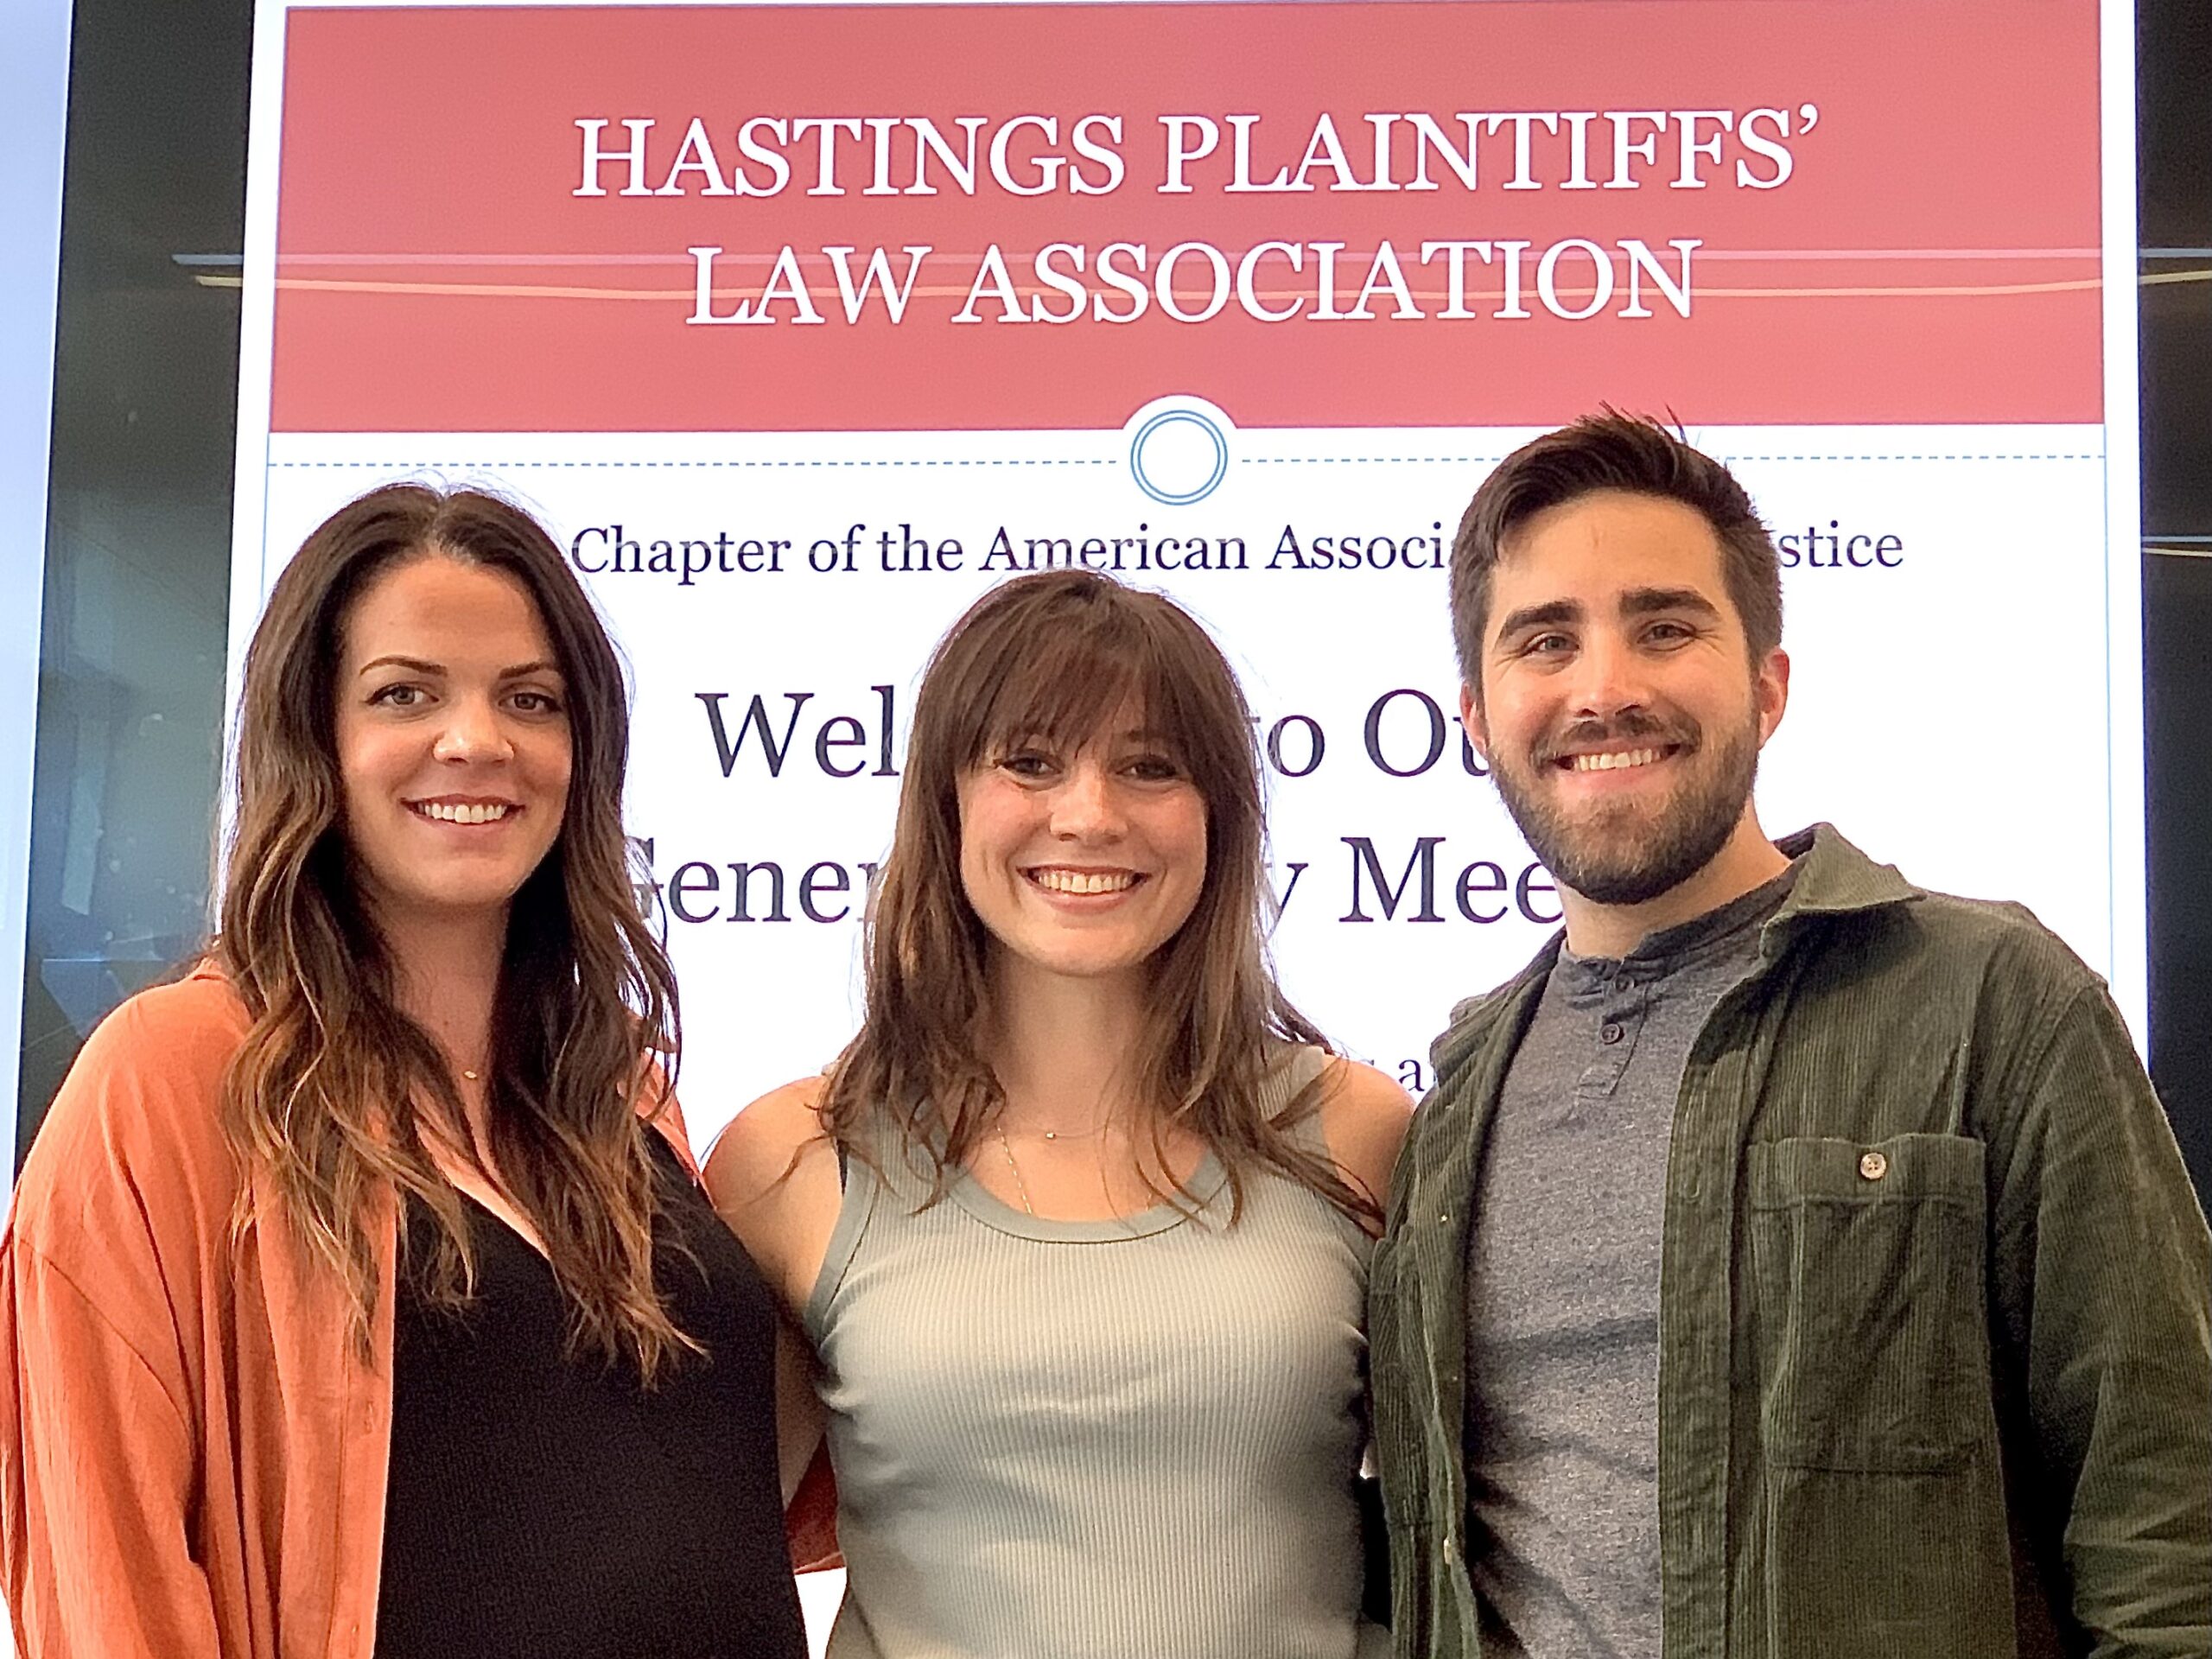 Three law students (two female, one male) pose and smile smile